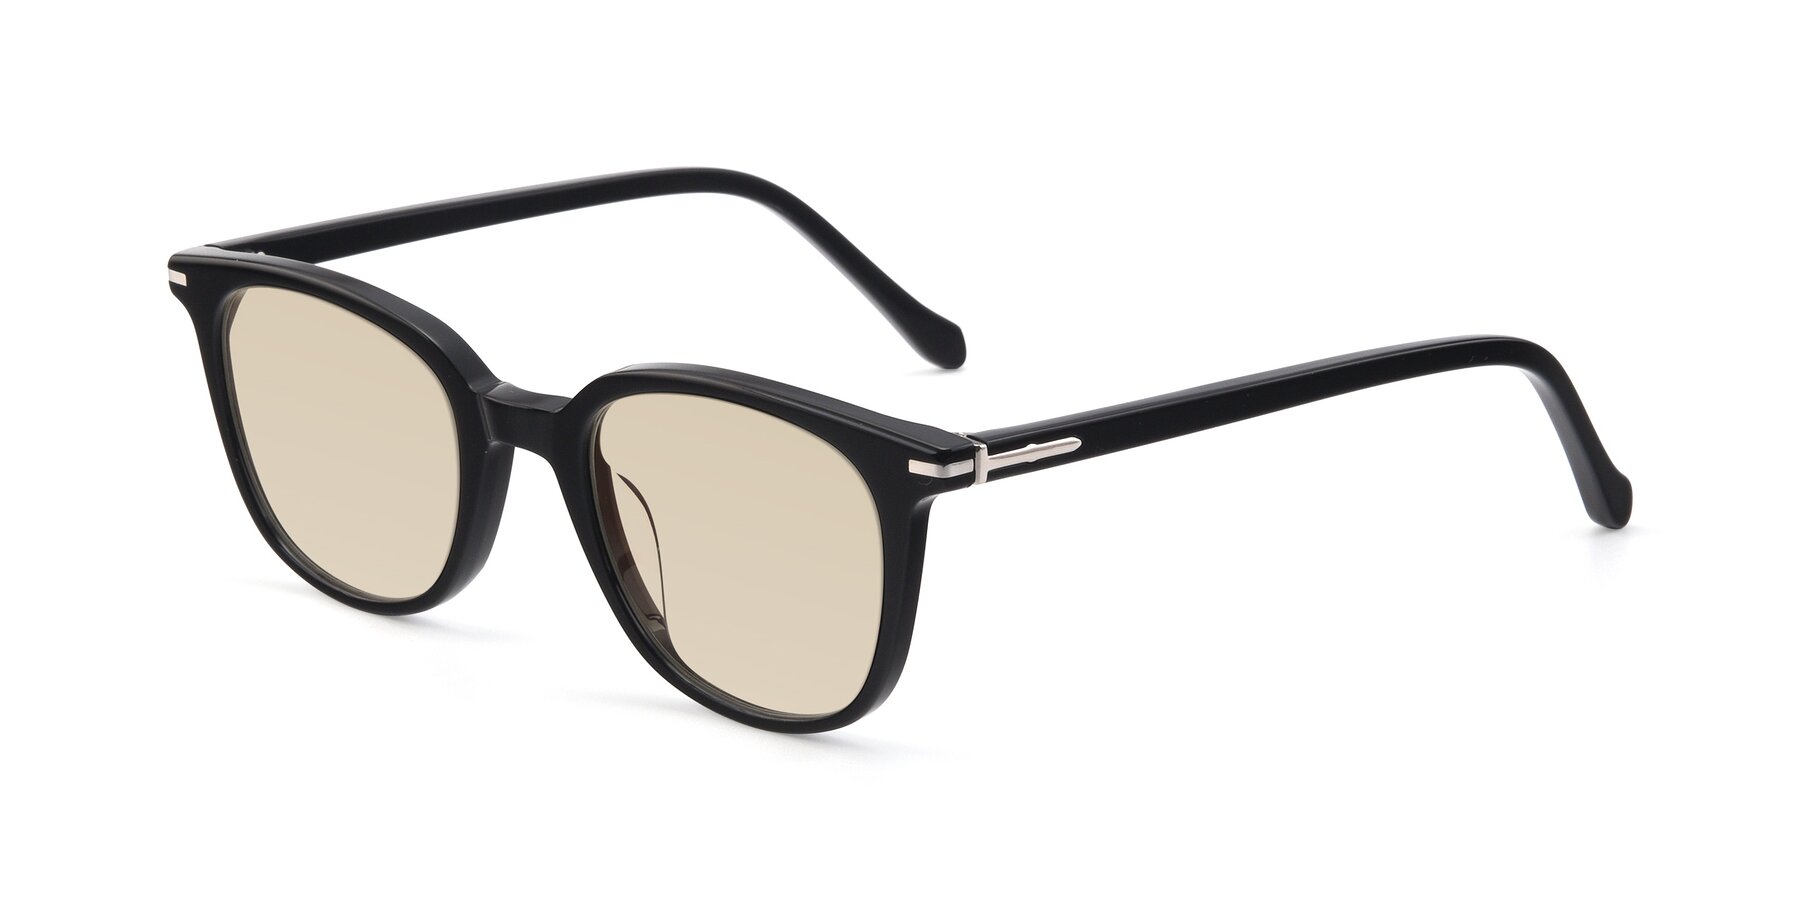 Angle of 17562 in Black with Light Brown Tinted Lenses